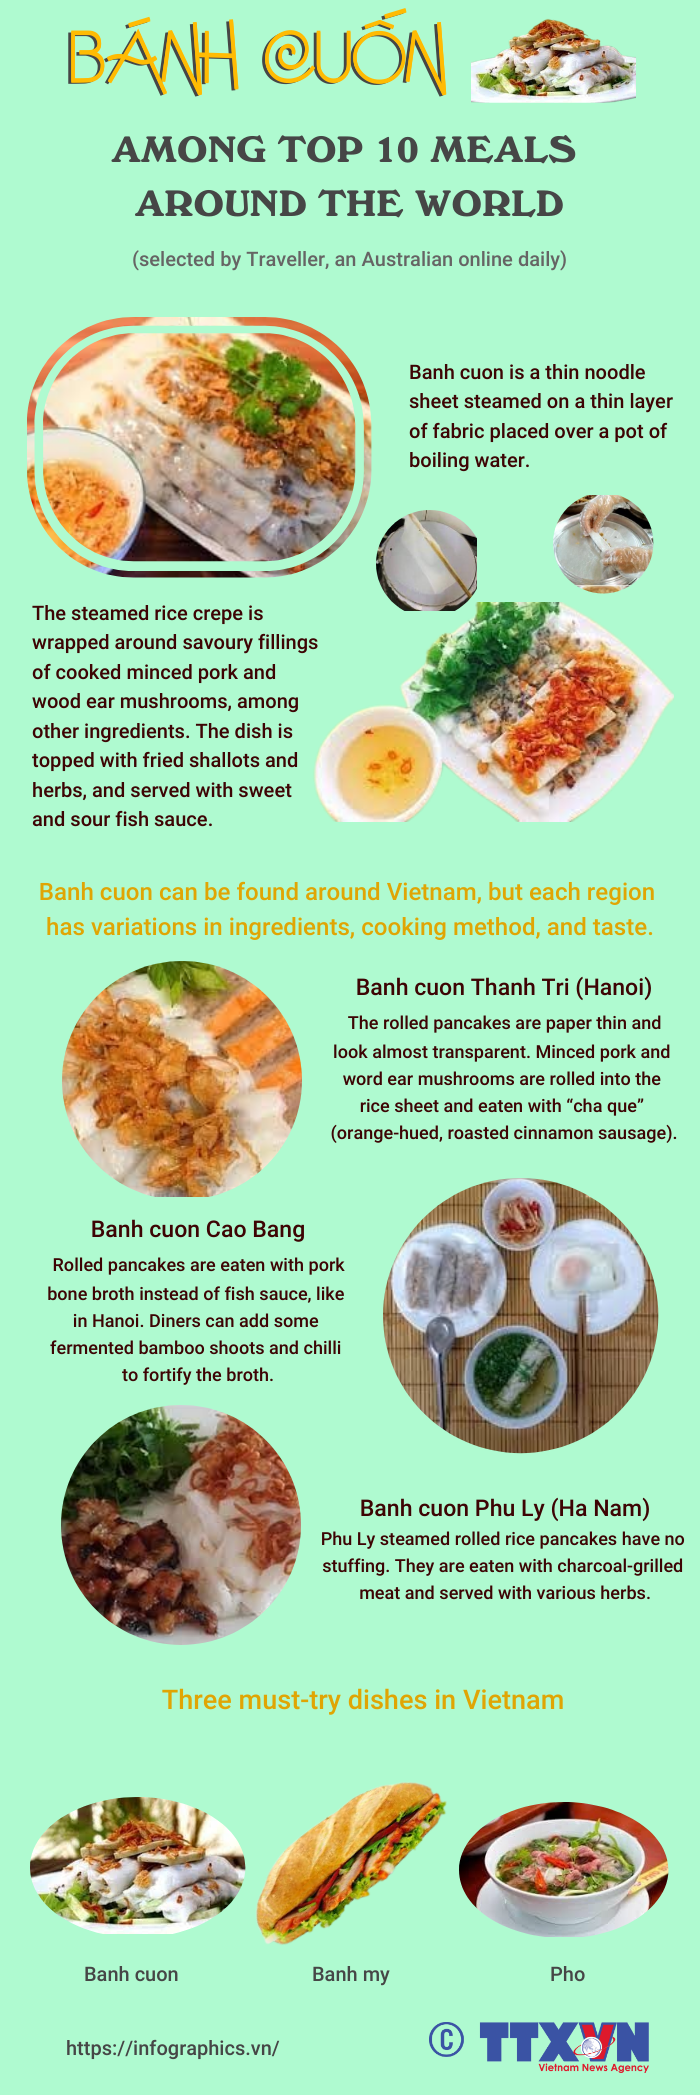 Banh cuon among top 10 meals around the world 